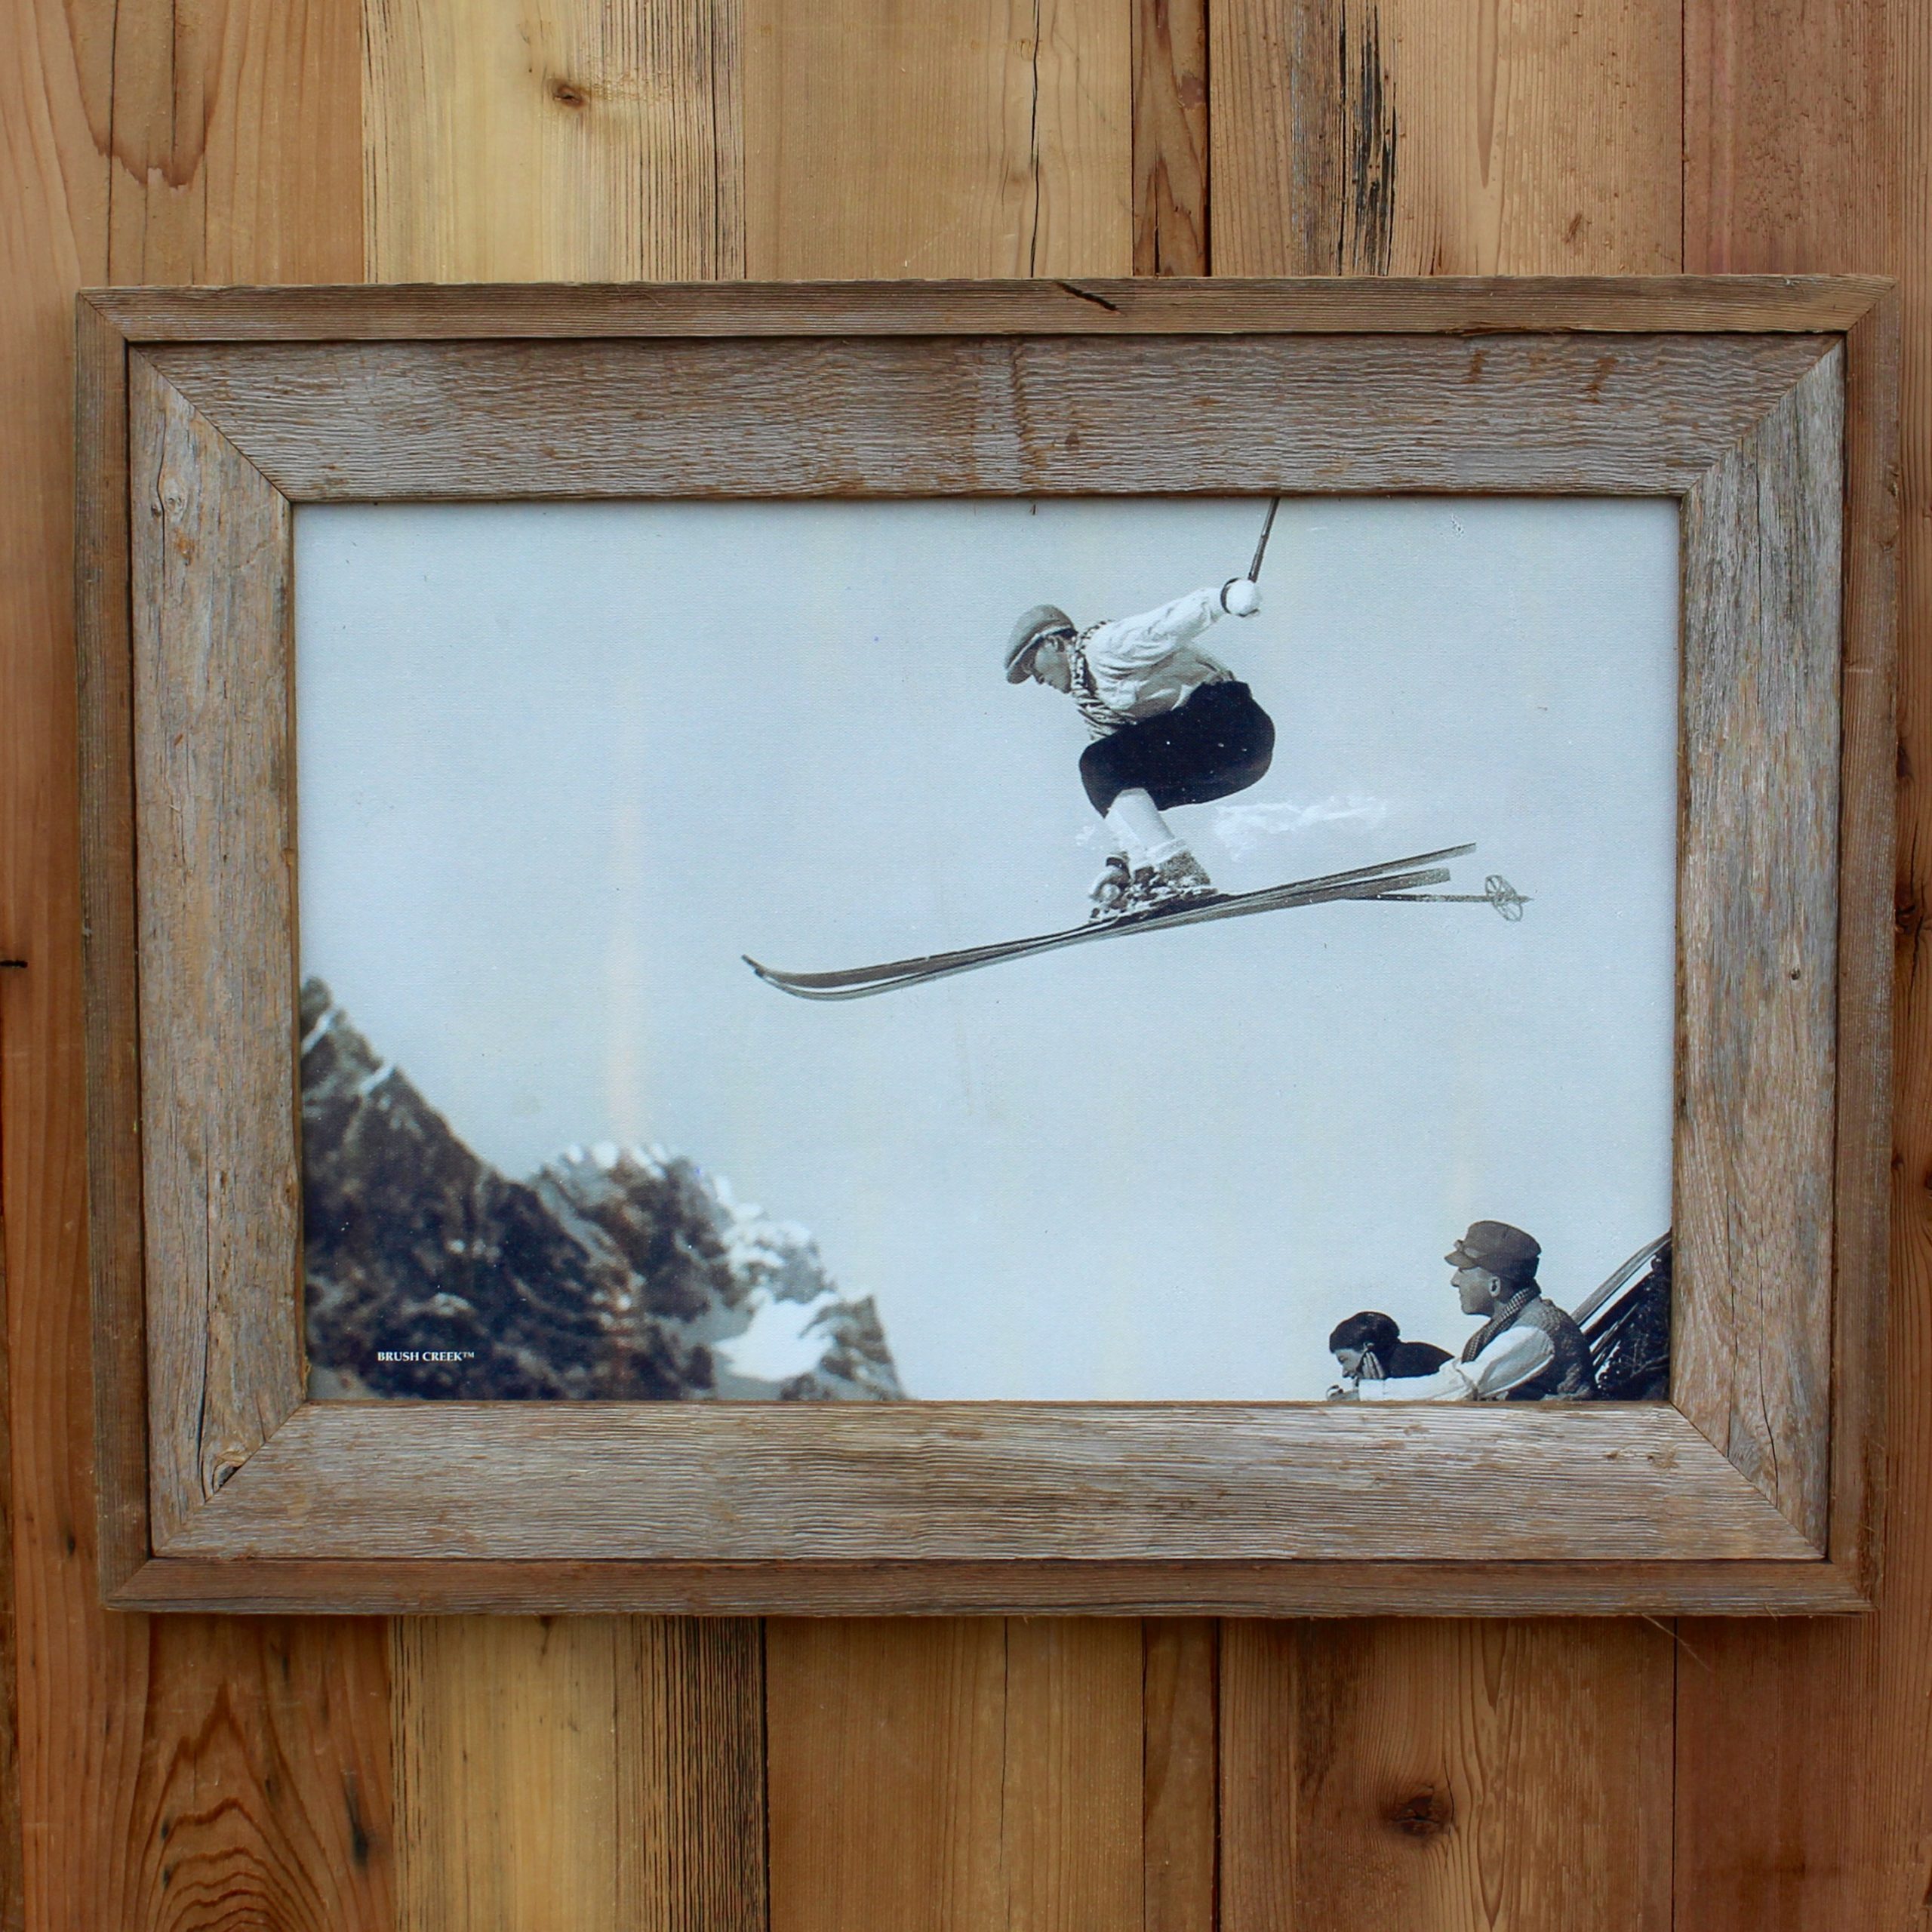 Rustic Picture Frame with Vintage Skier Canvas Print